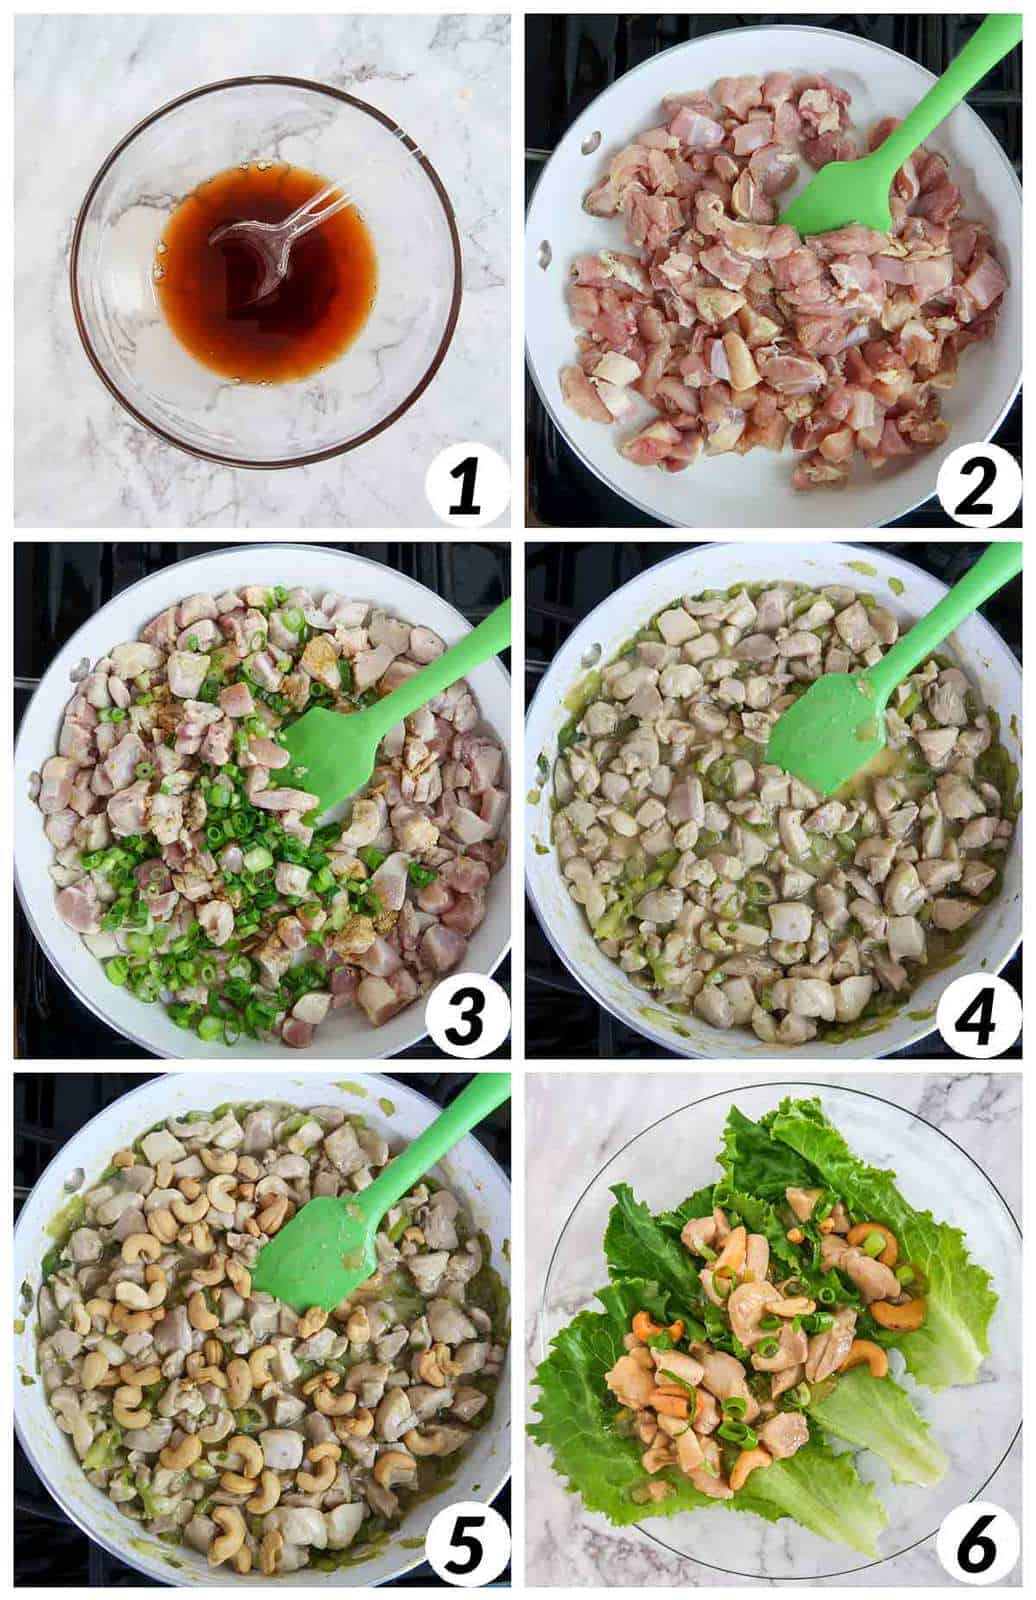 Six panel grid of process shots- mixing together ingredients, cooking in a skillet, and forming lettuce wraps.